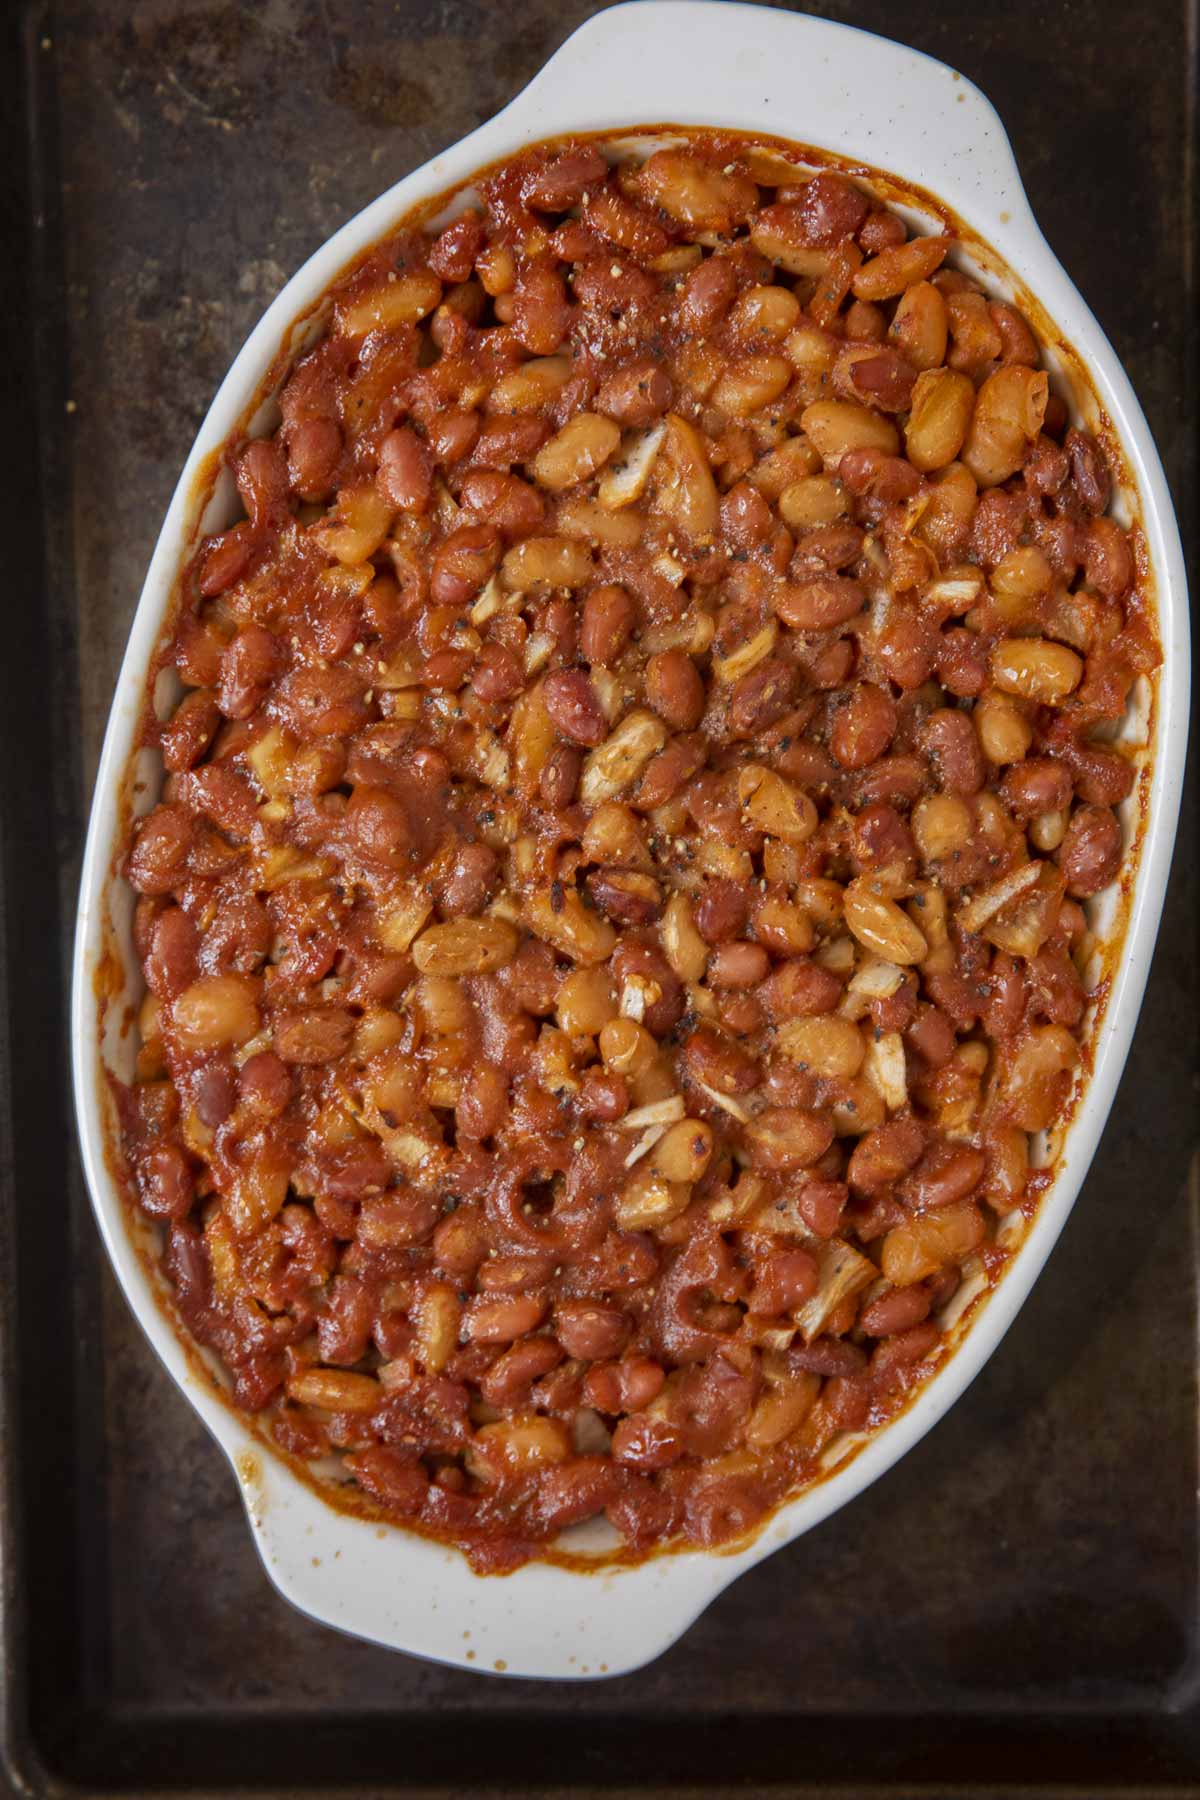 Healthy Baked Beans Recipe (No Ketchup!) - Cooking Made Healthy